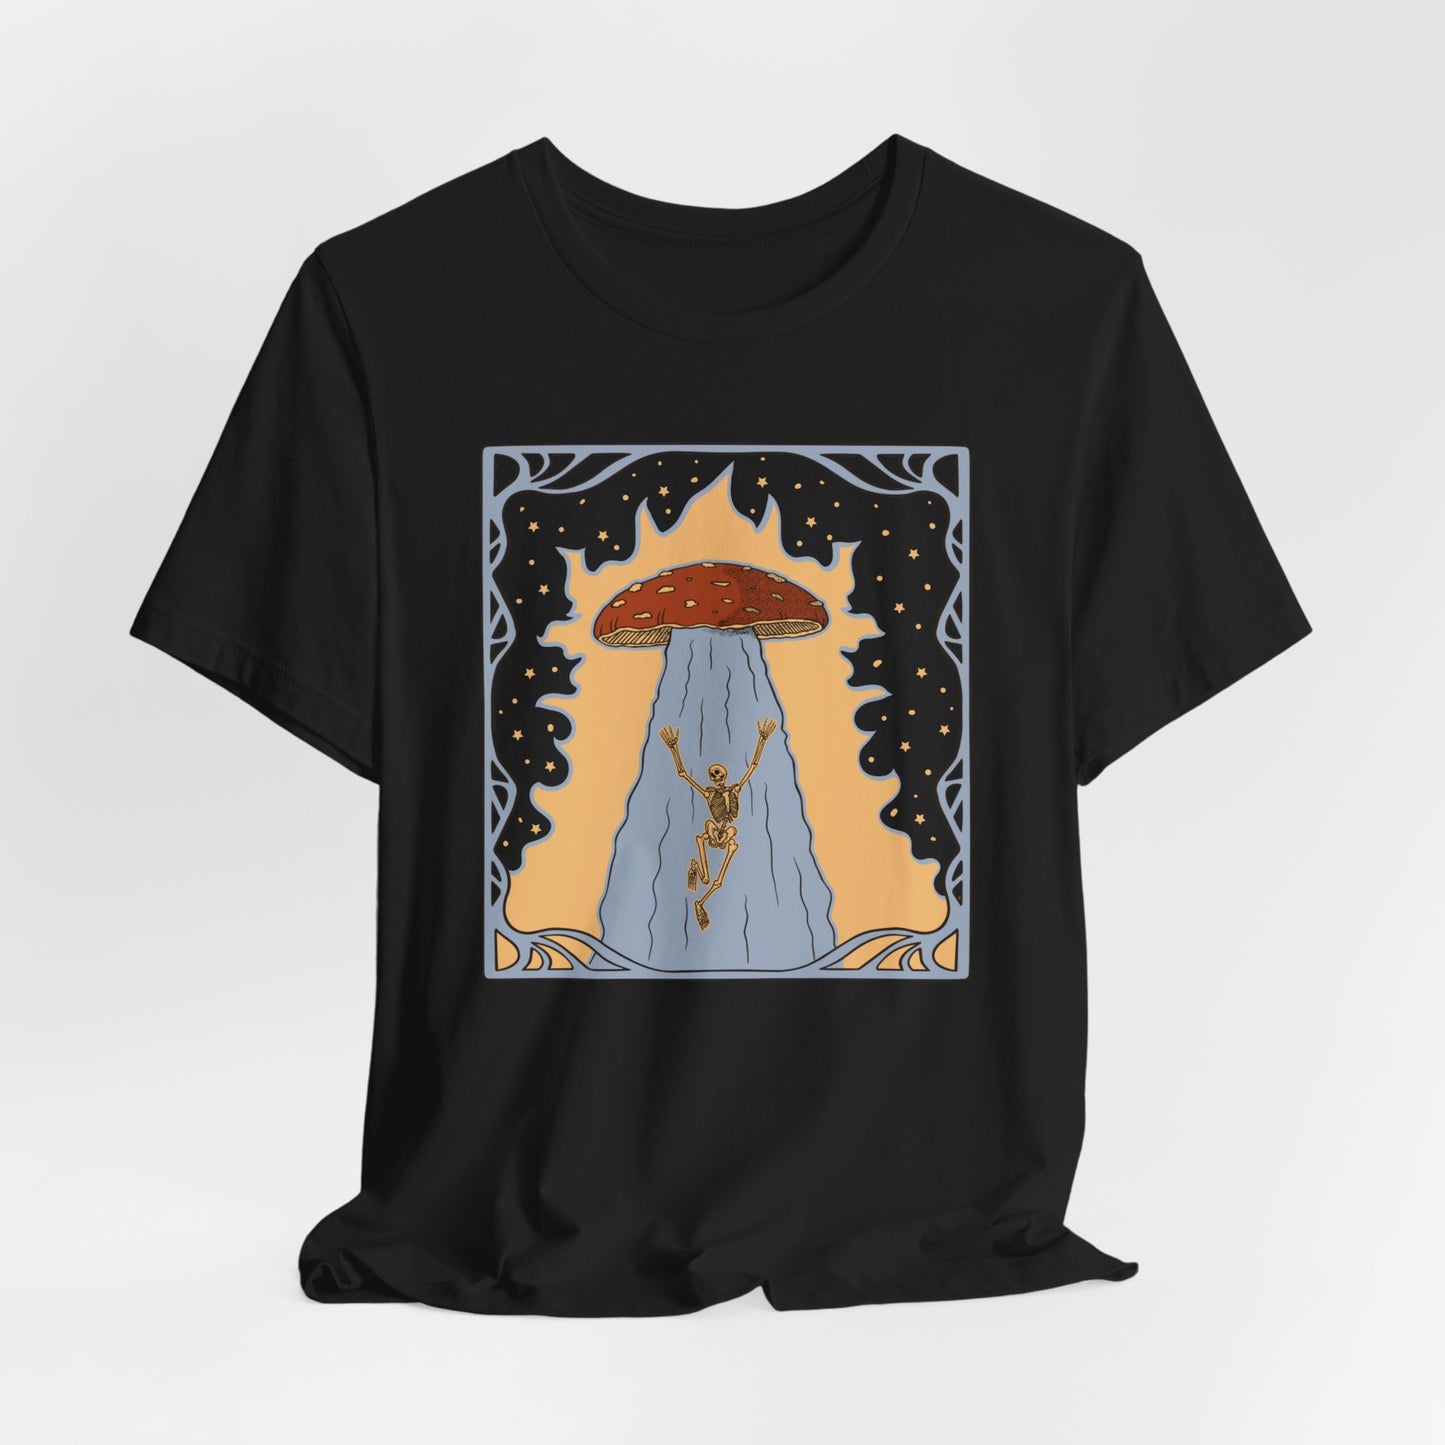 Abduction with mushrooms unisex t-shirt